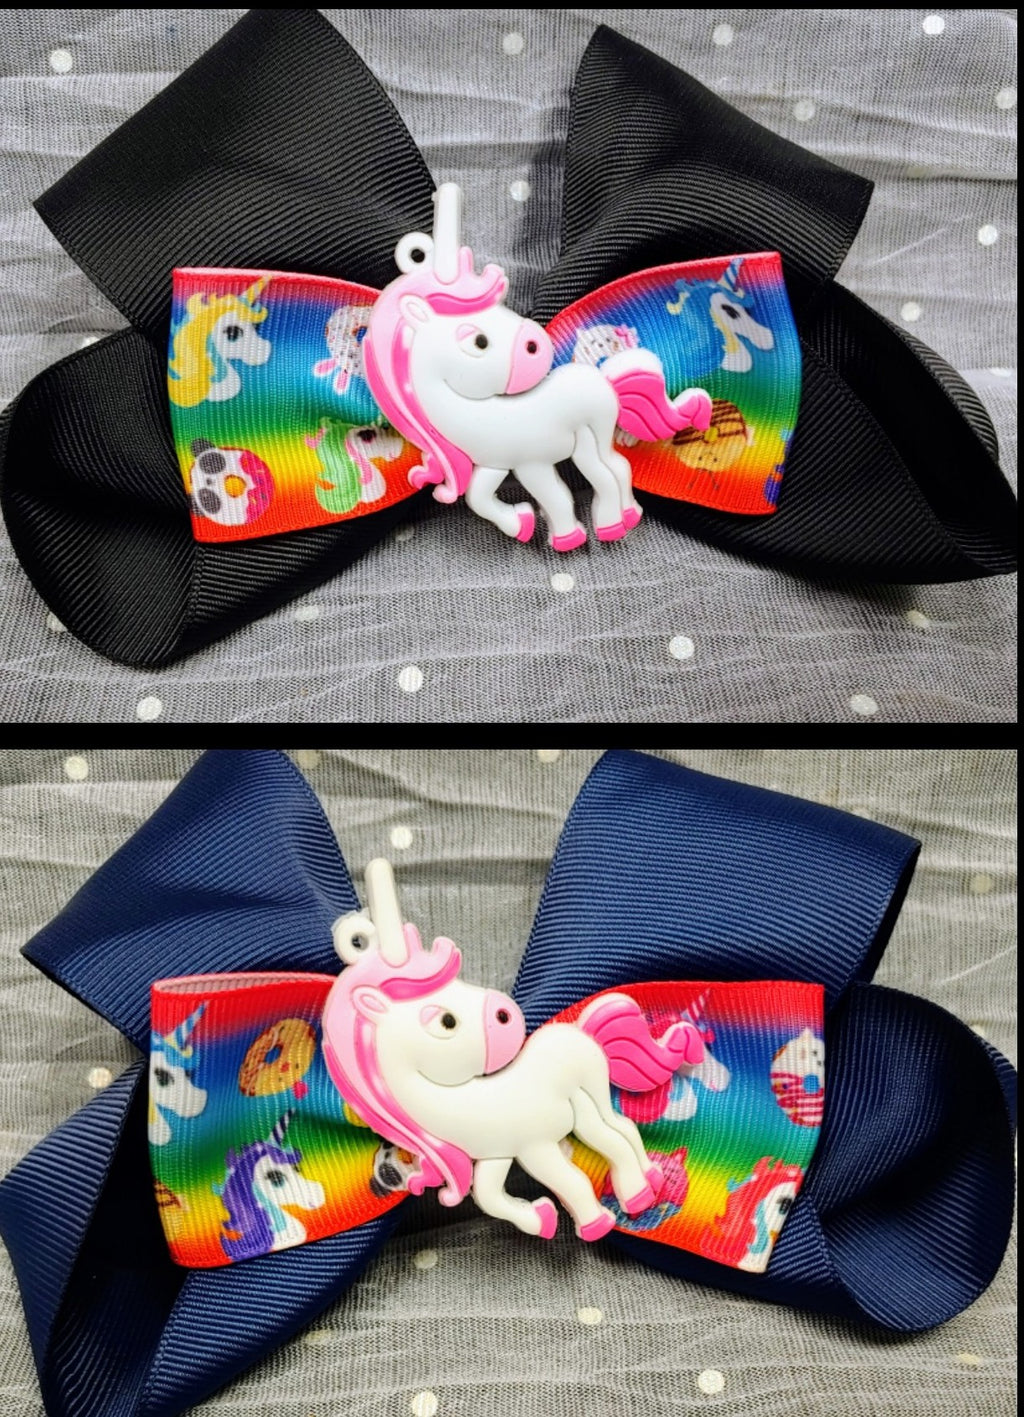 UNICORN FIGURE BOW (roughly 6in) - Lil Monkey Boutique